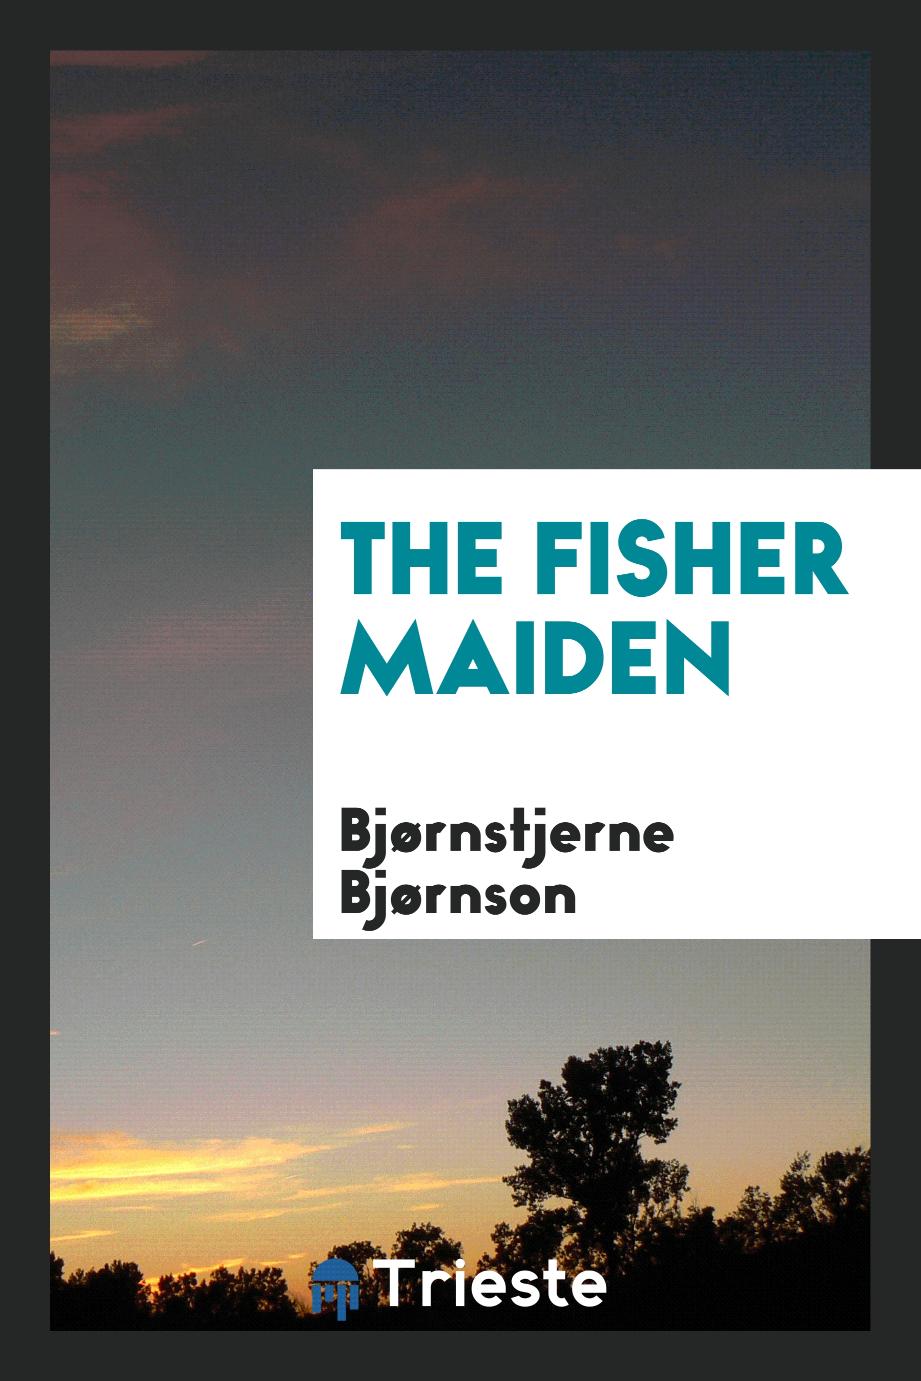 The fisher maiden